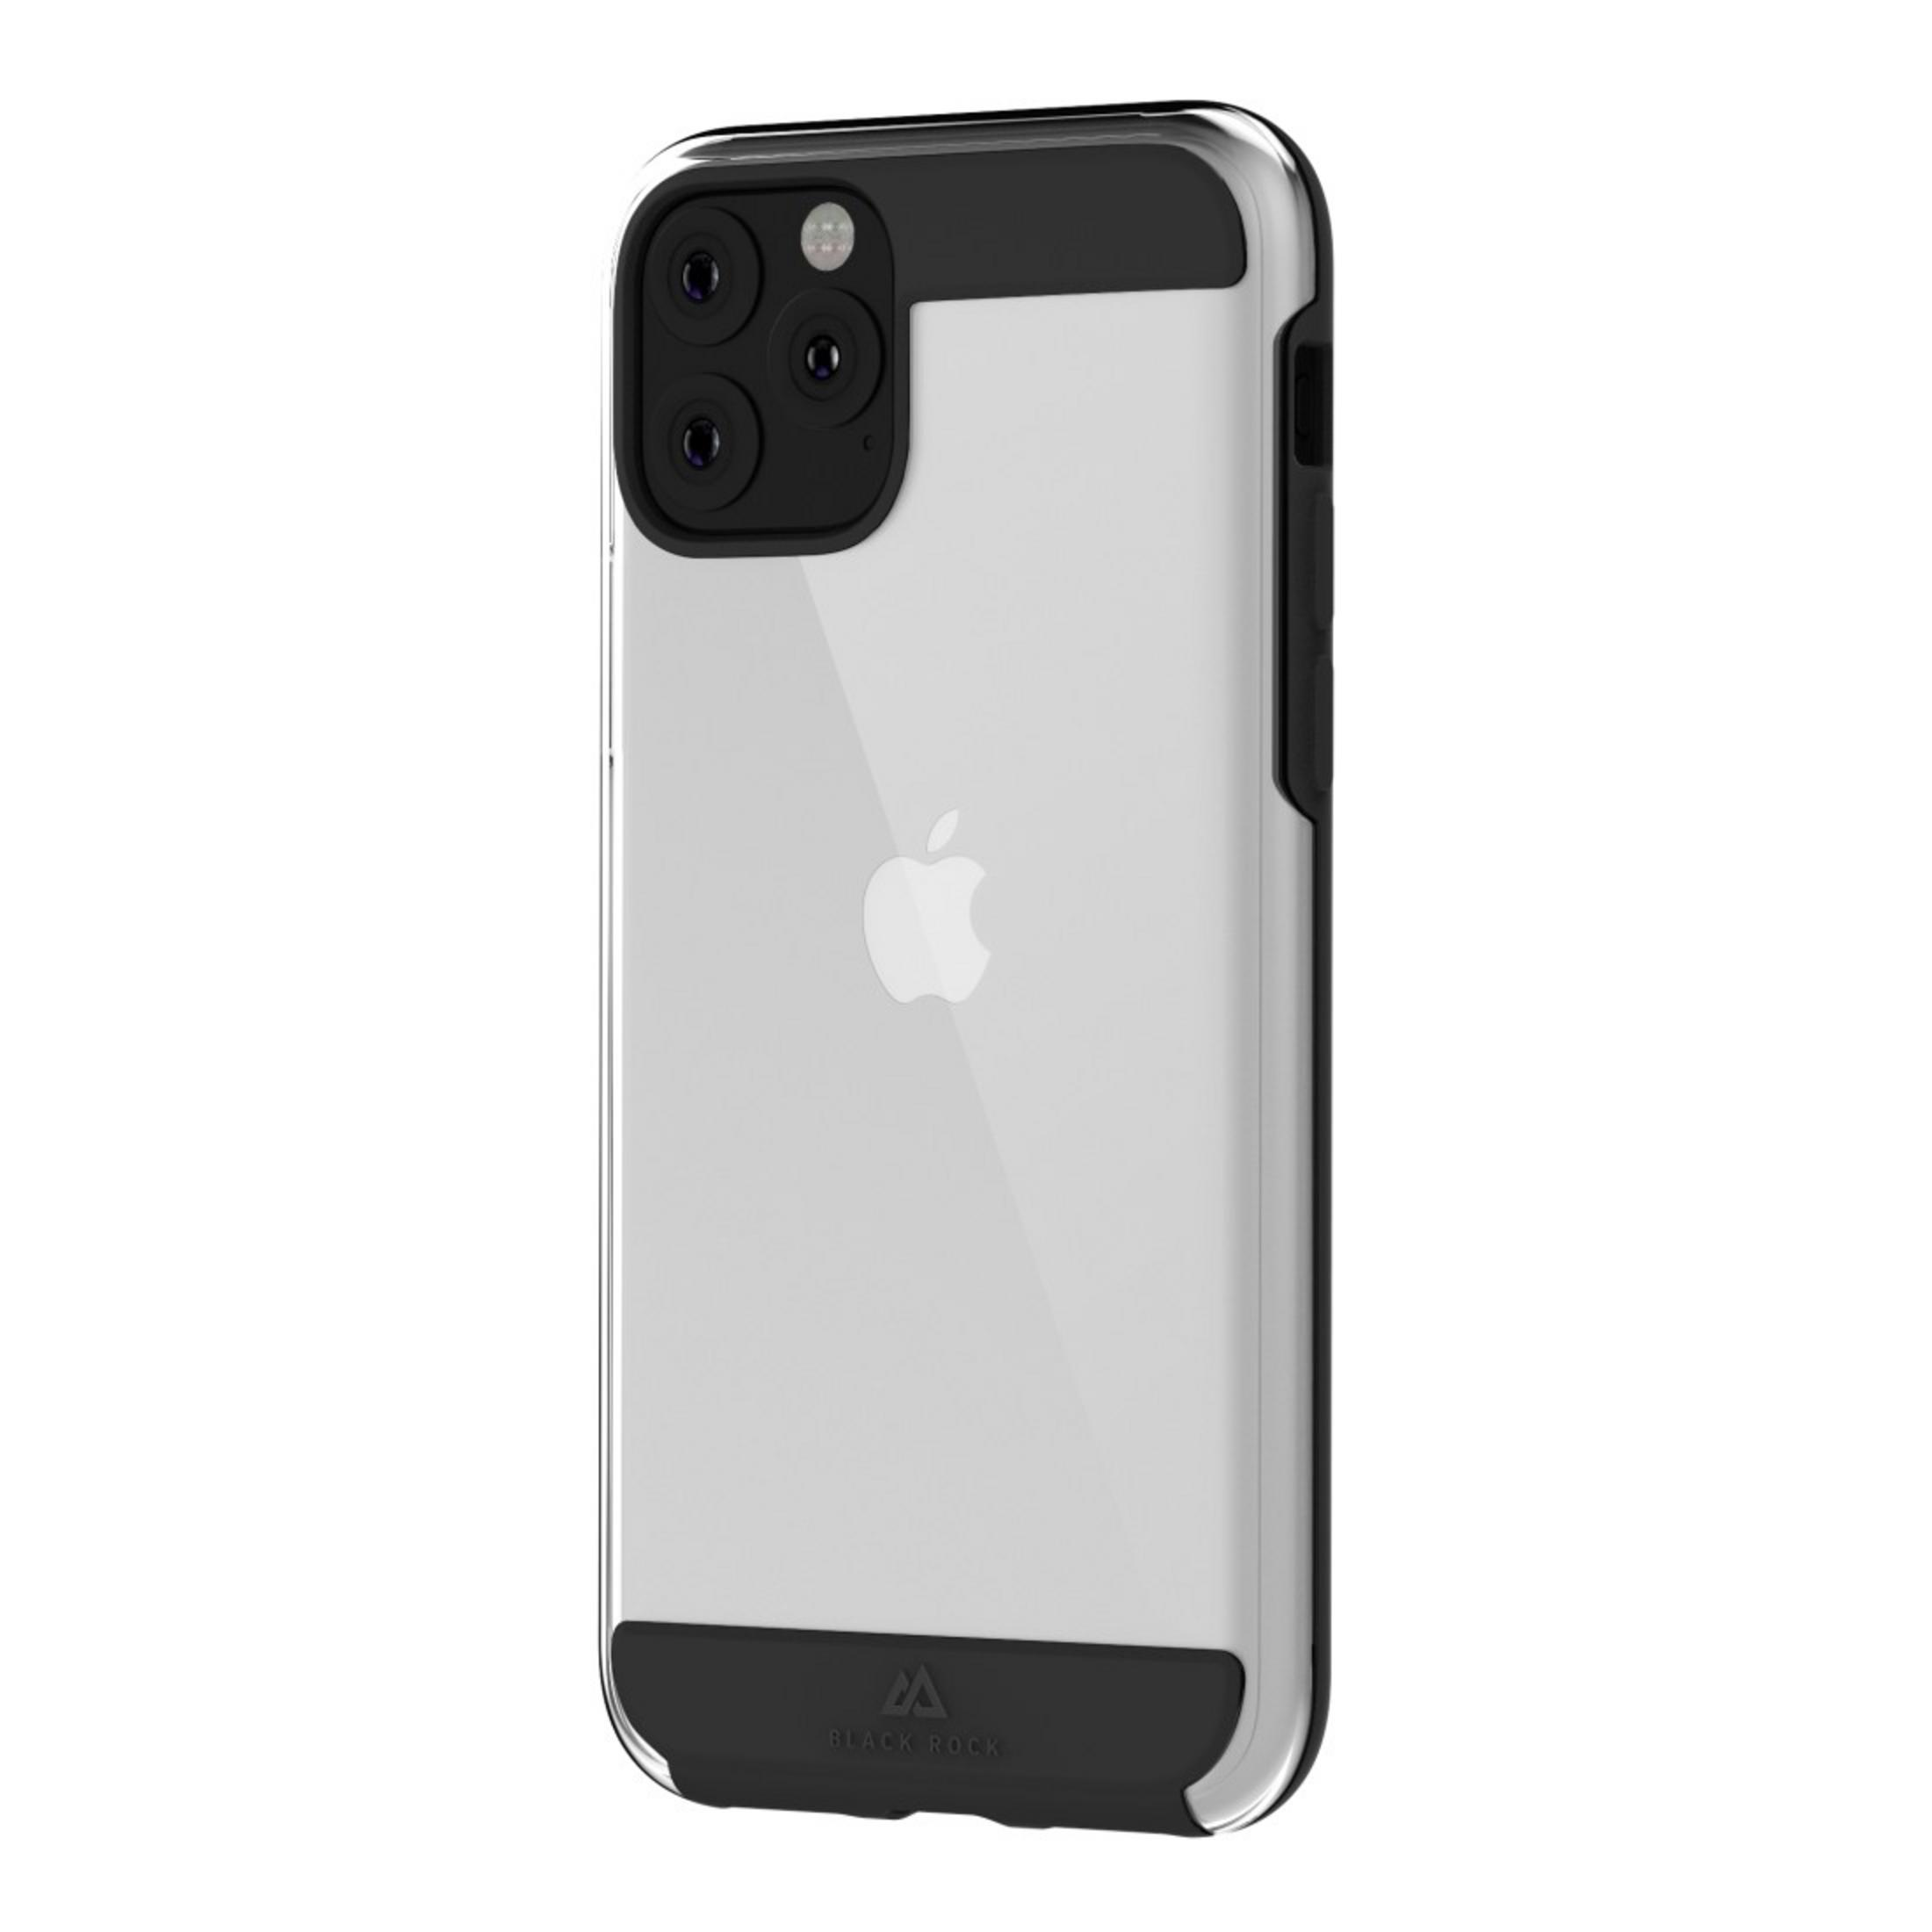 BLACK ROCK 186970 CO Apple, Schwarz Backcover, Pro, AIR 11 PRO 11 SW, iPhone IPH ROBUST